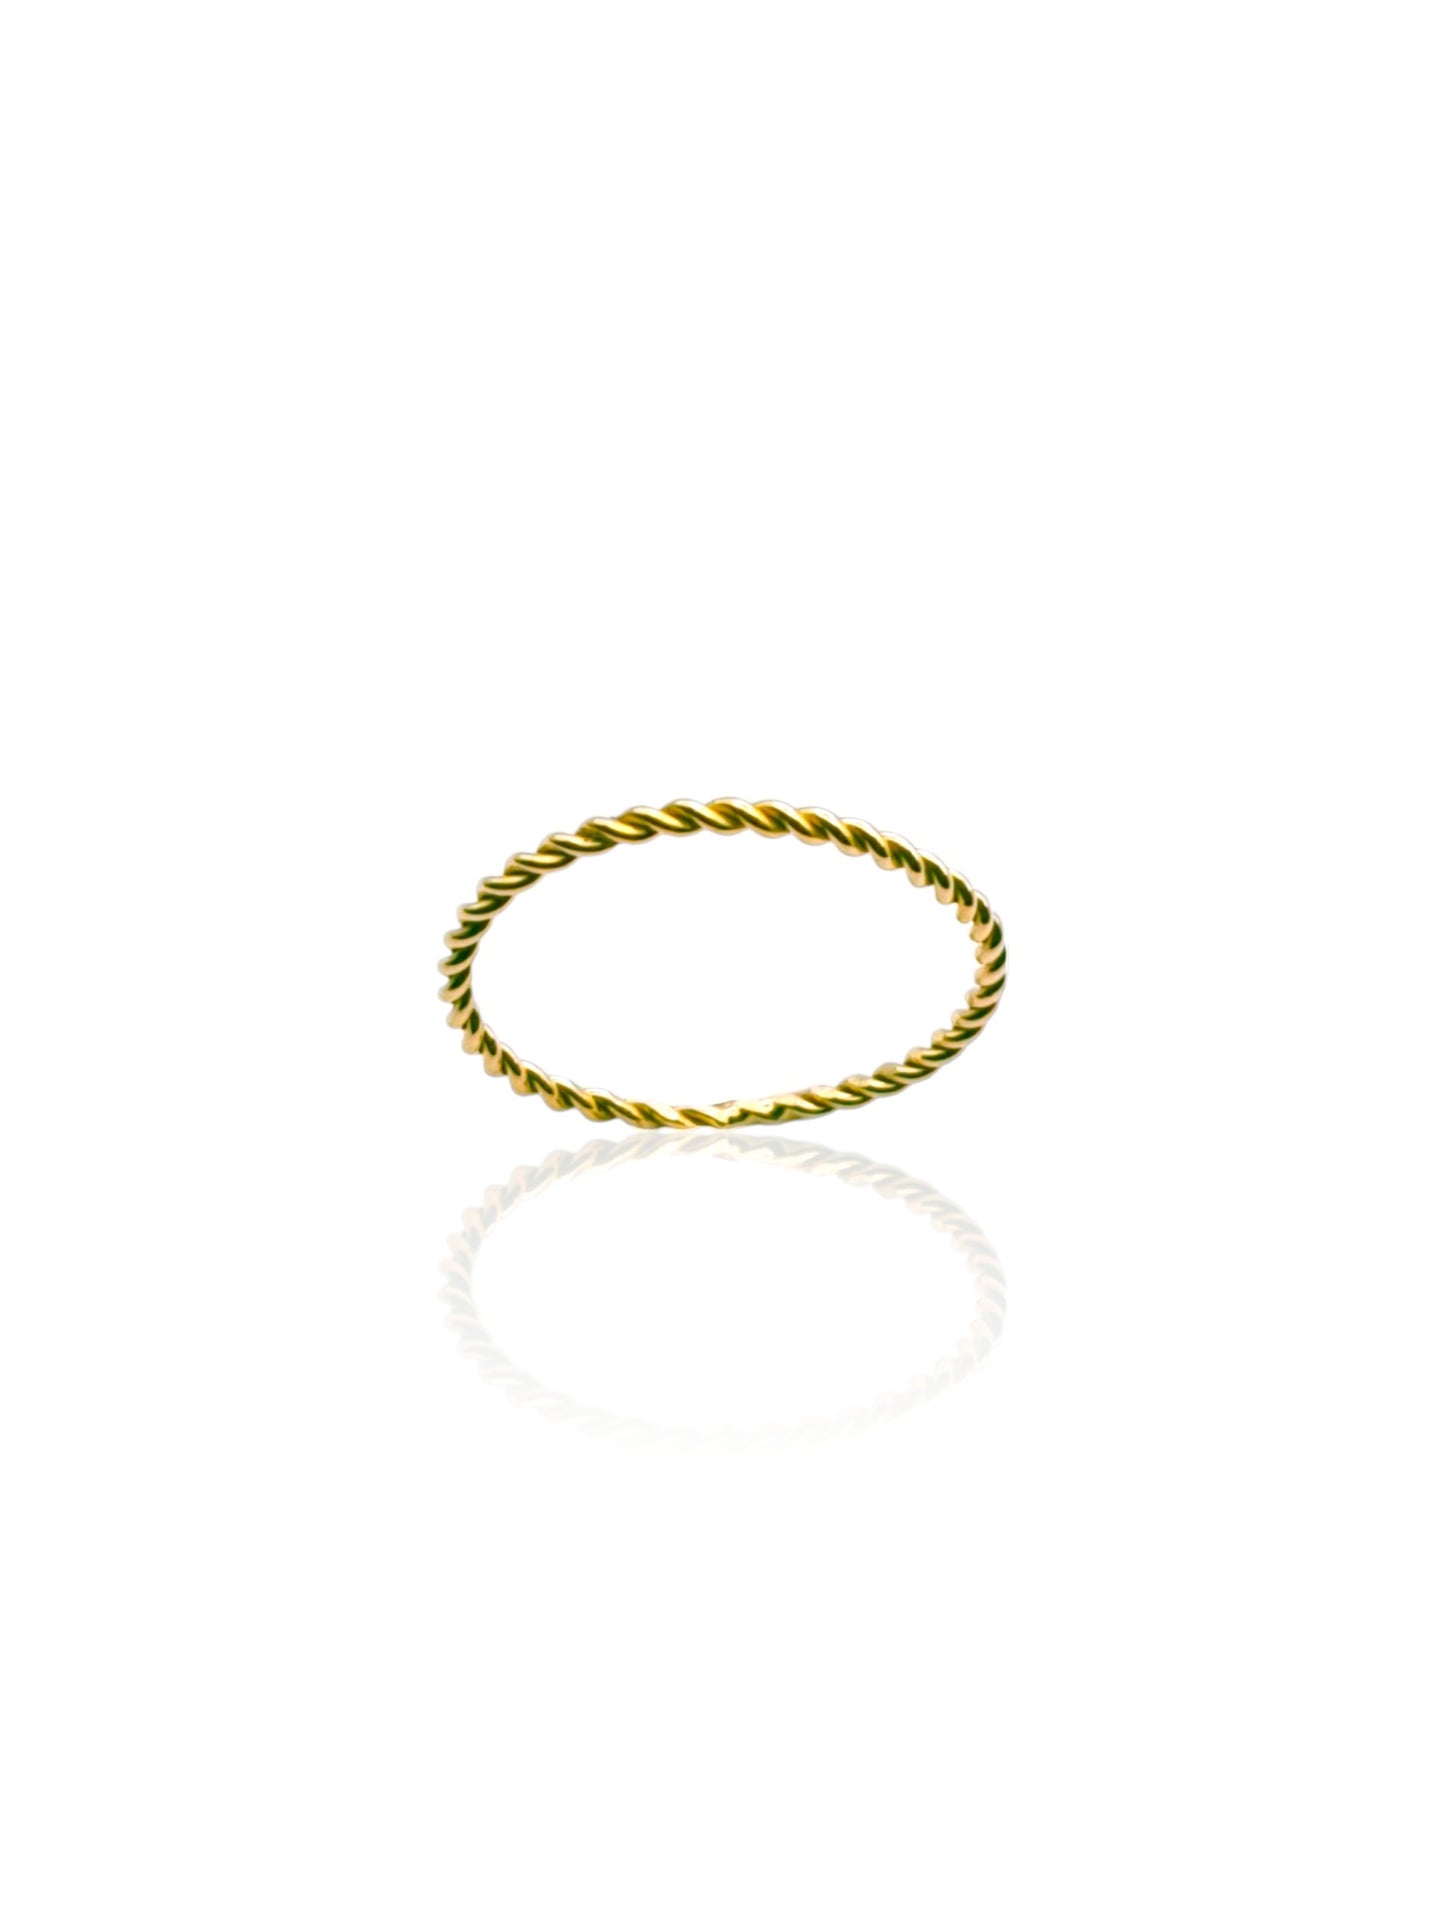 Solid 18ct Gold Women's Twist Ring, front on